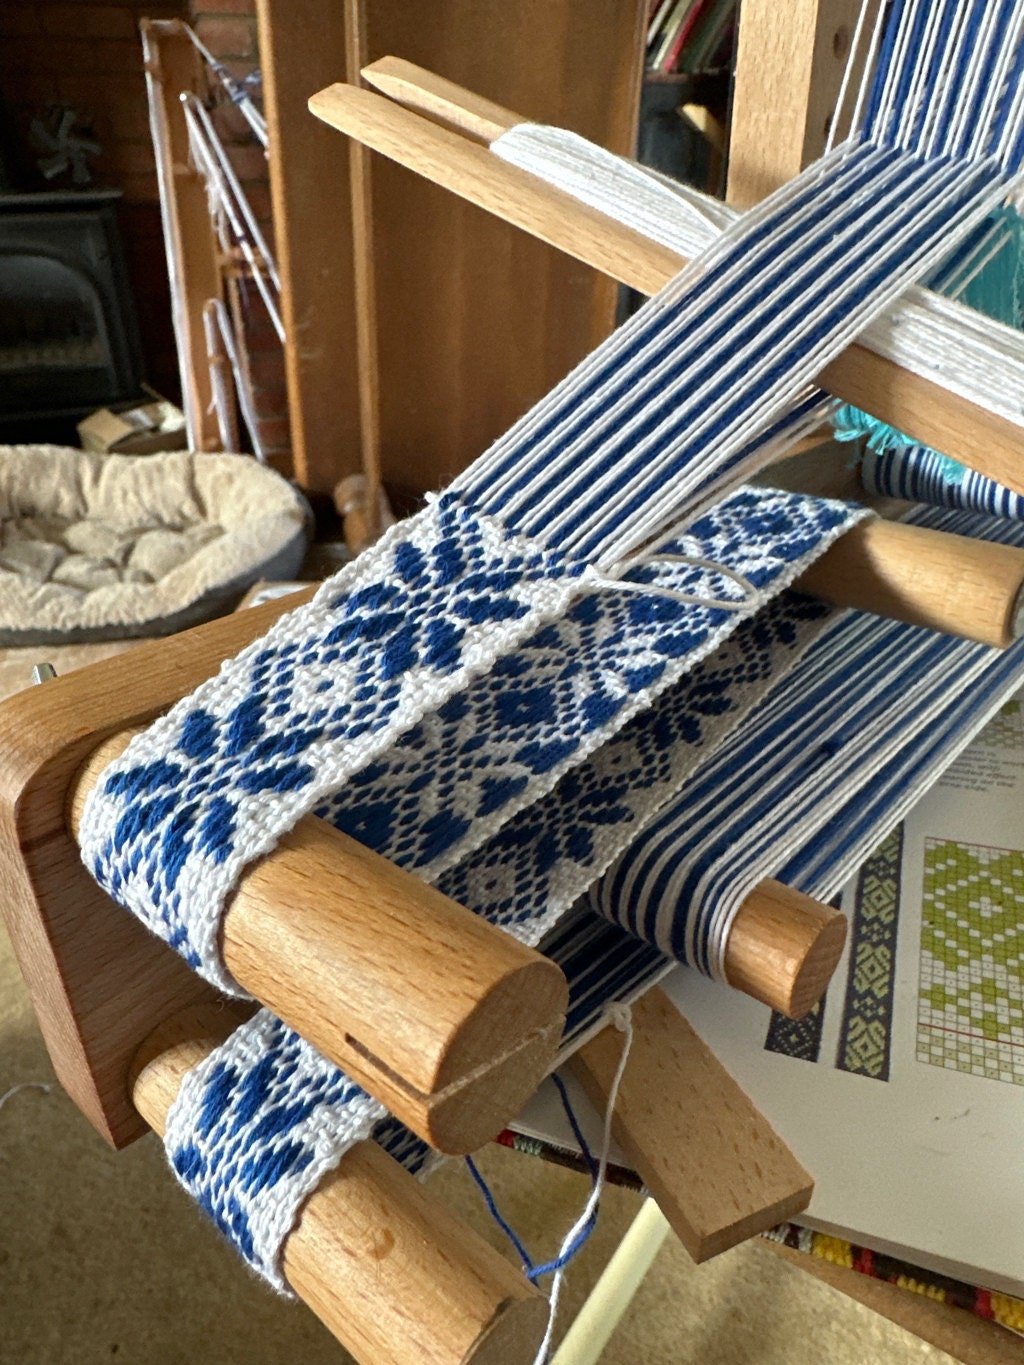 Inkle loom A Small (upgrade options see below)